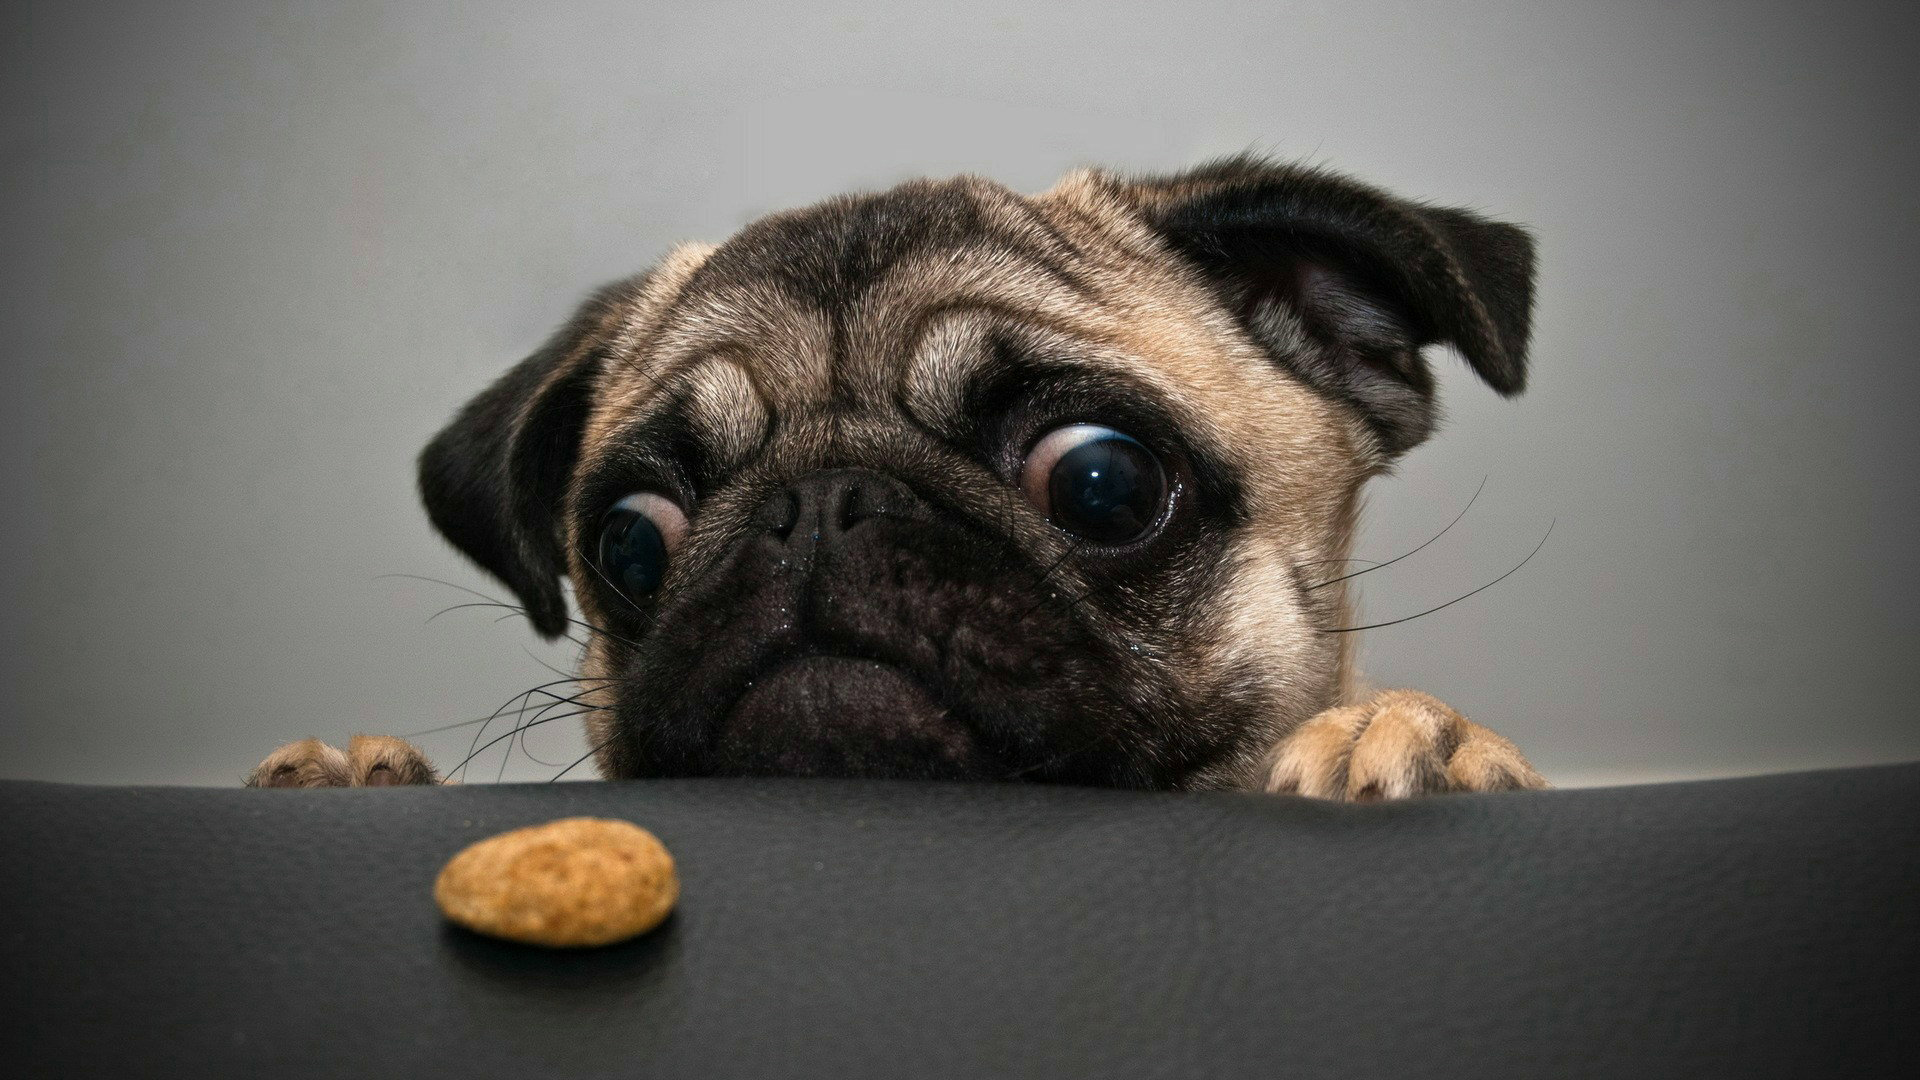 I Want That Cookie....